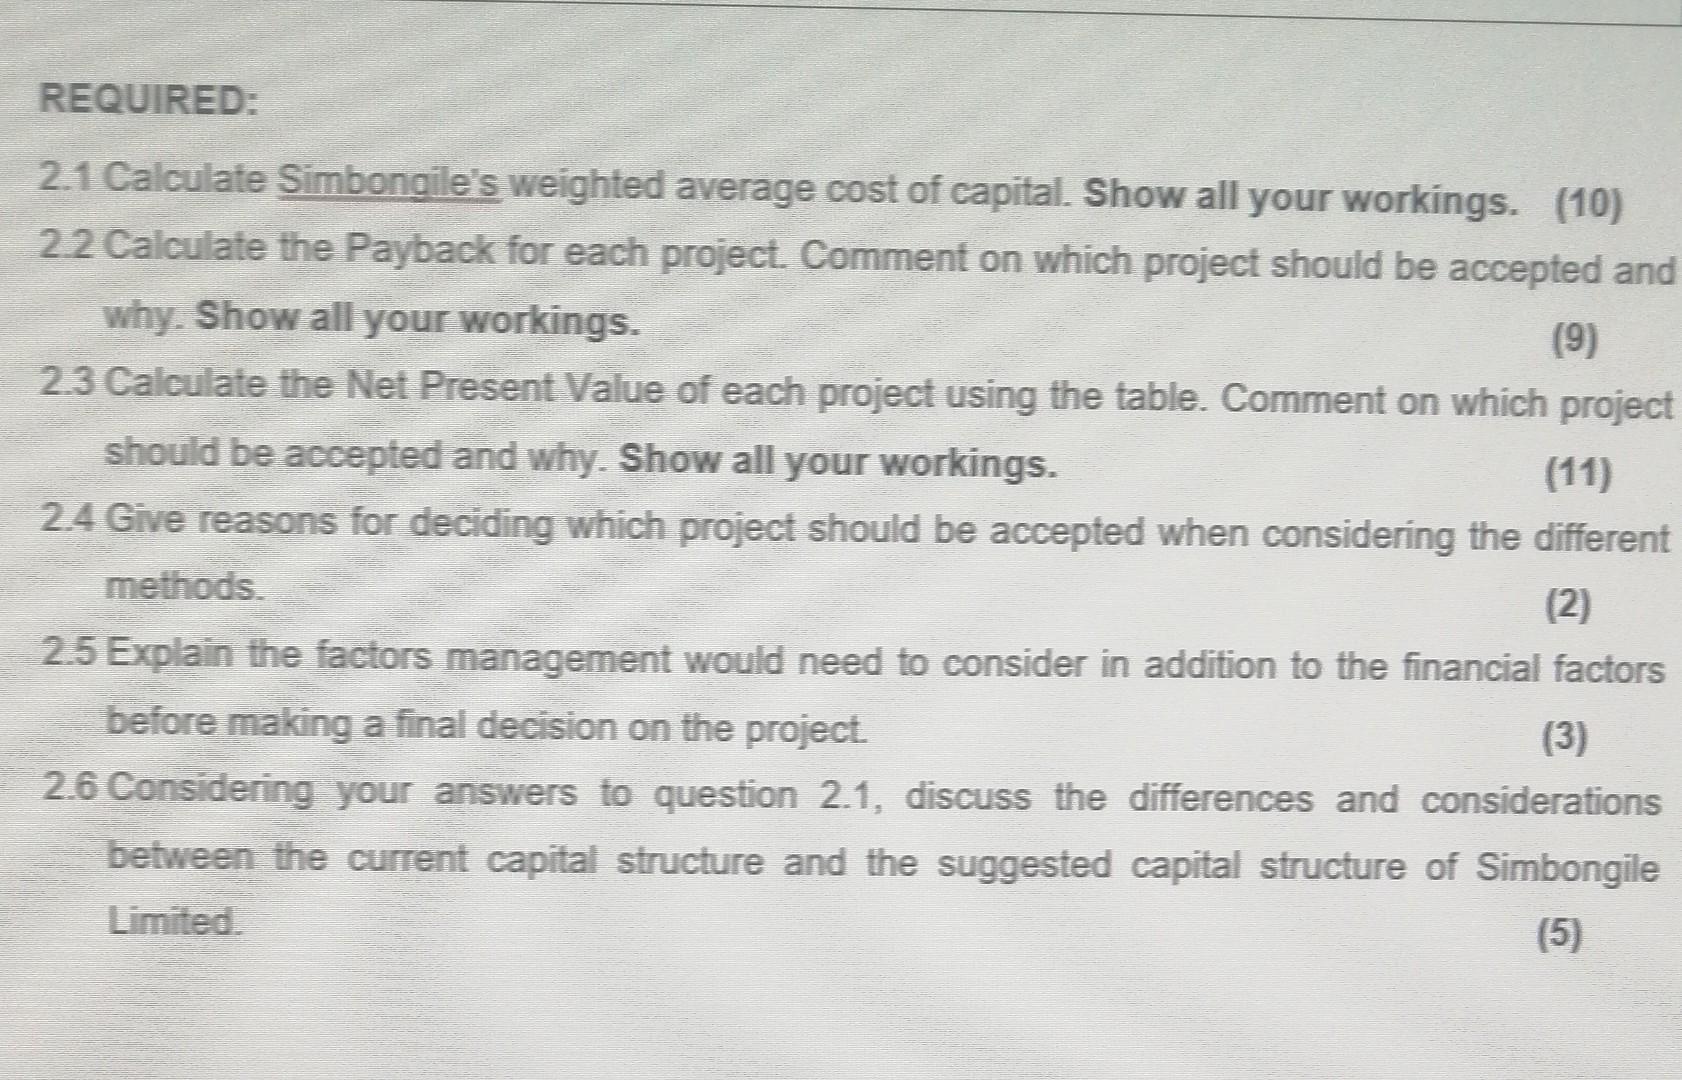 REQUIRED: 2.1 Calculate Simbongile's weighted average cost of capital. Show all your workings. (10) 2.2